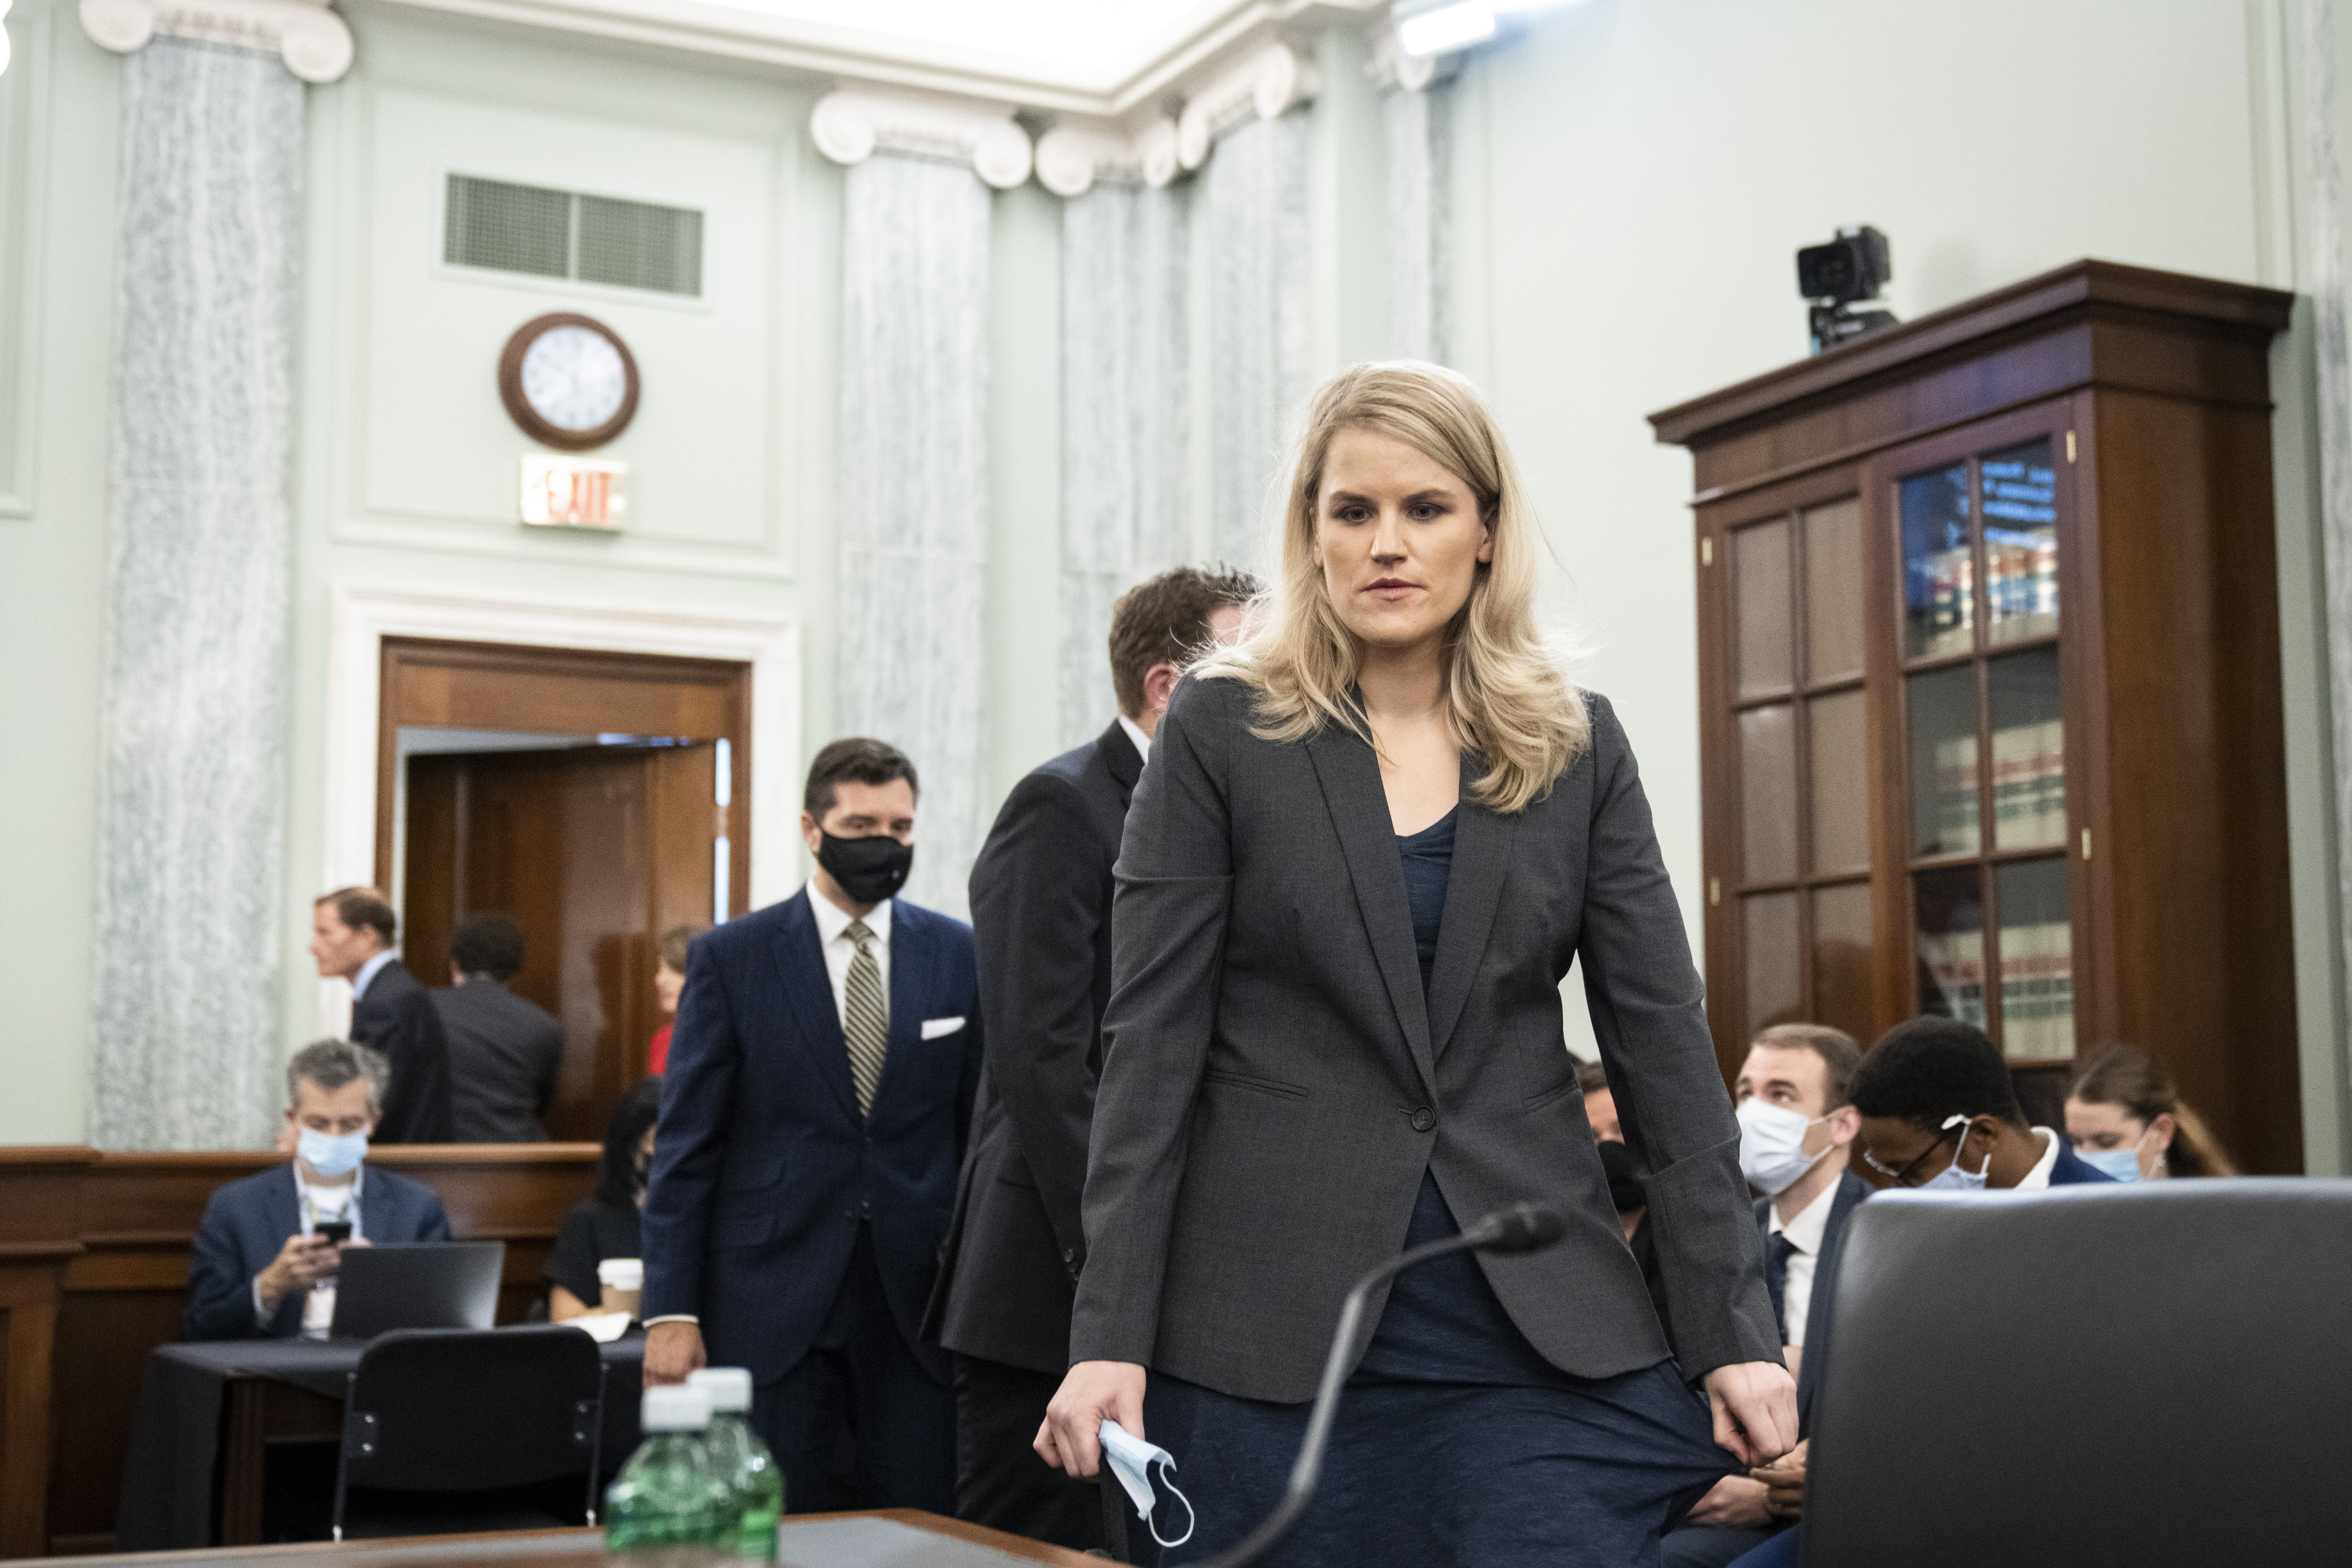 Former Facebook employee and whistleblower Frances Haugen arrives to testify before a Senate Committee on Commerce, Science, and Transportation hearing on Capitol Hill on Tuesday, Oct. 5, 2021, in Washington. 